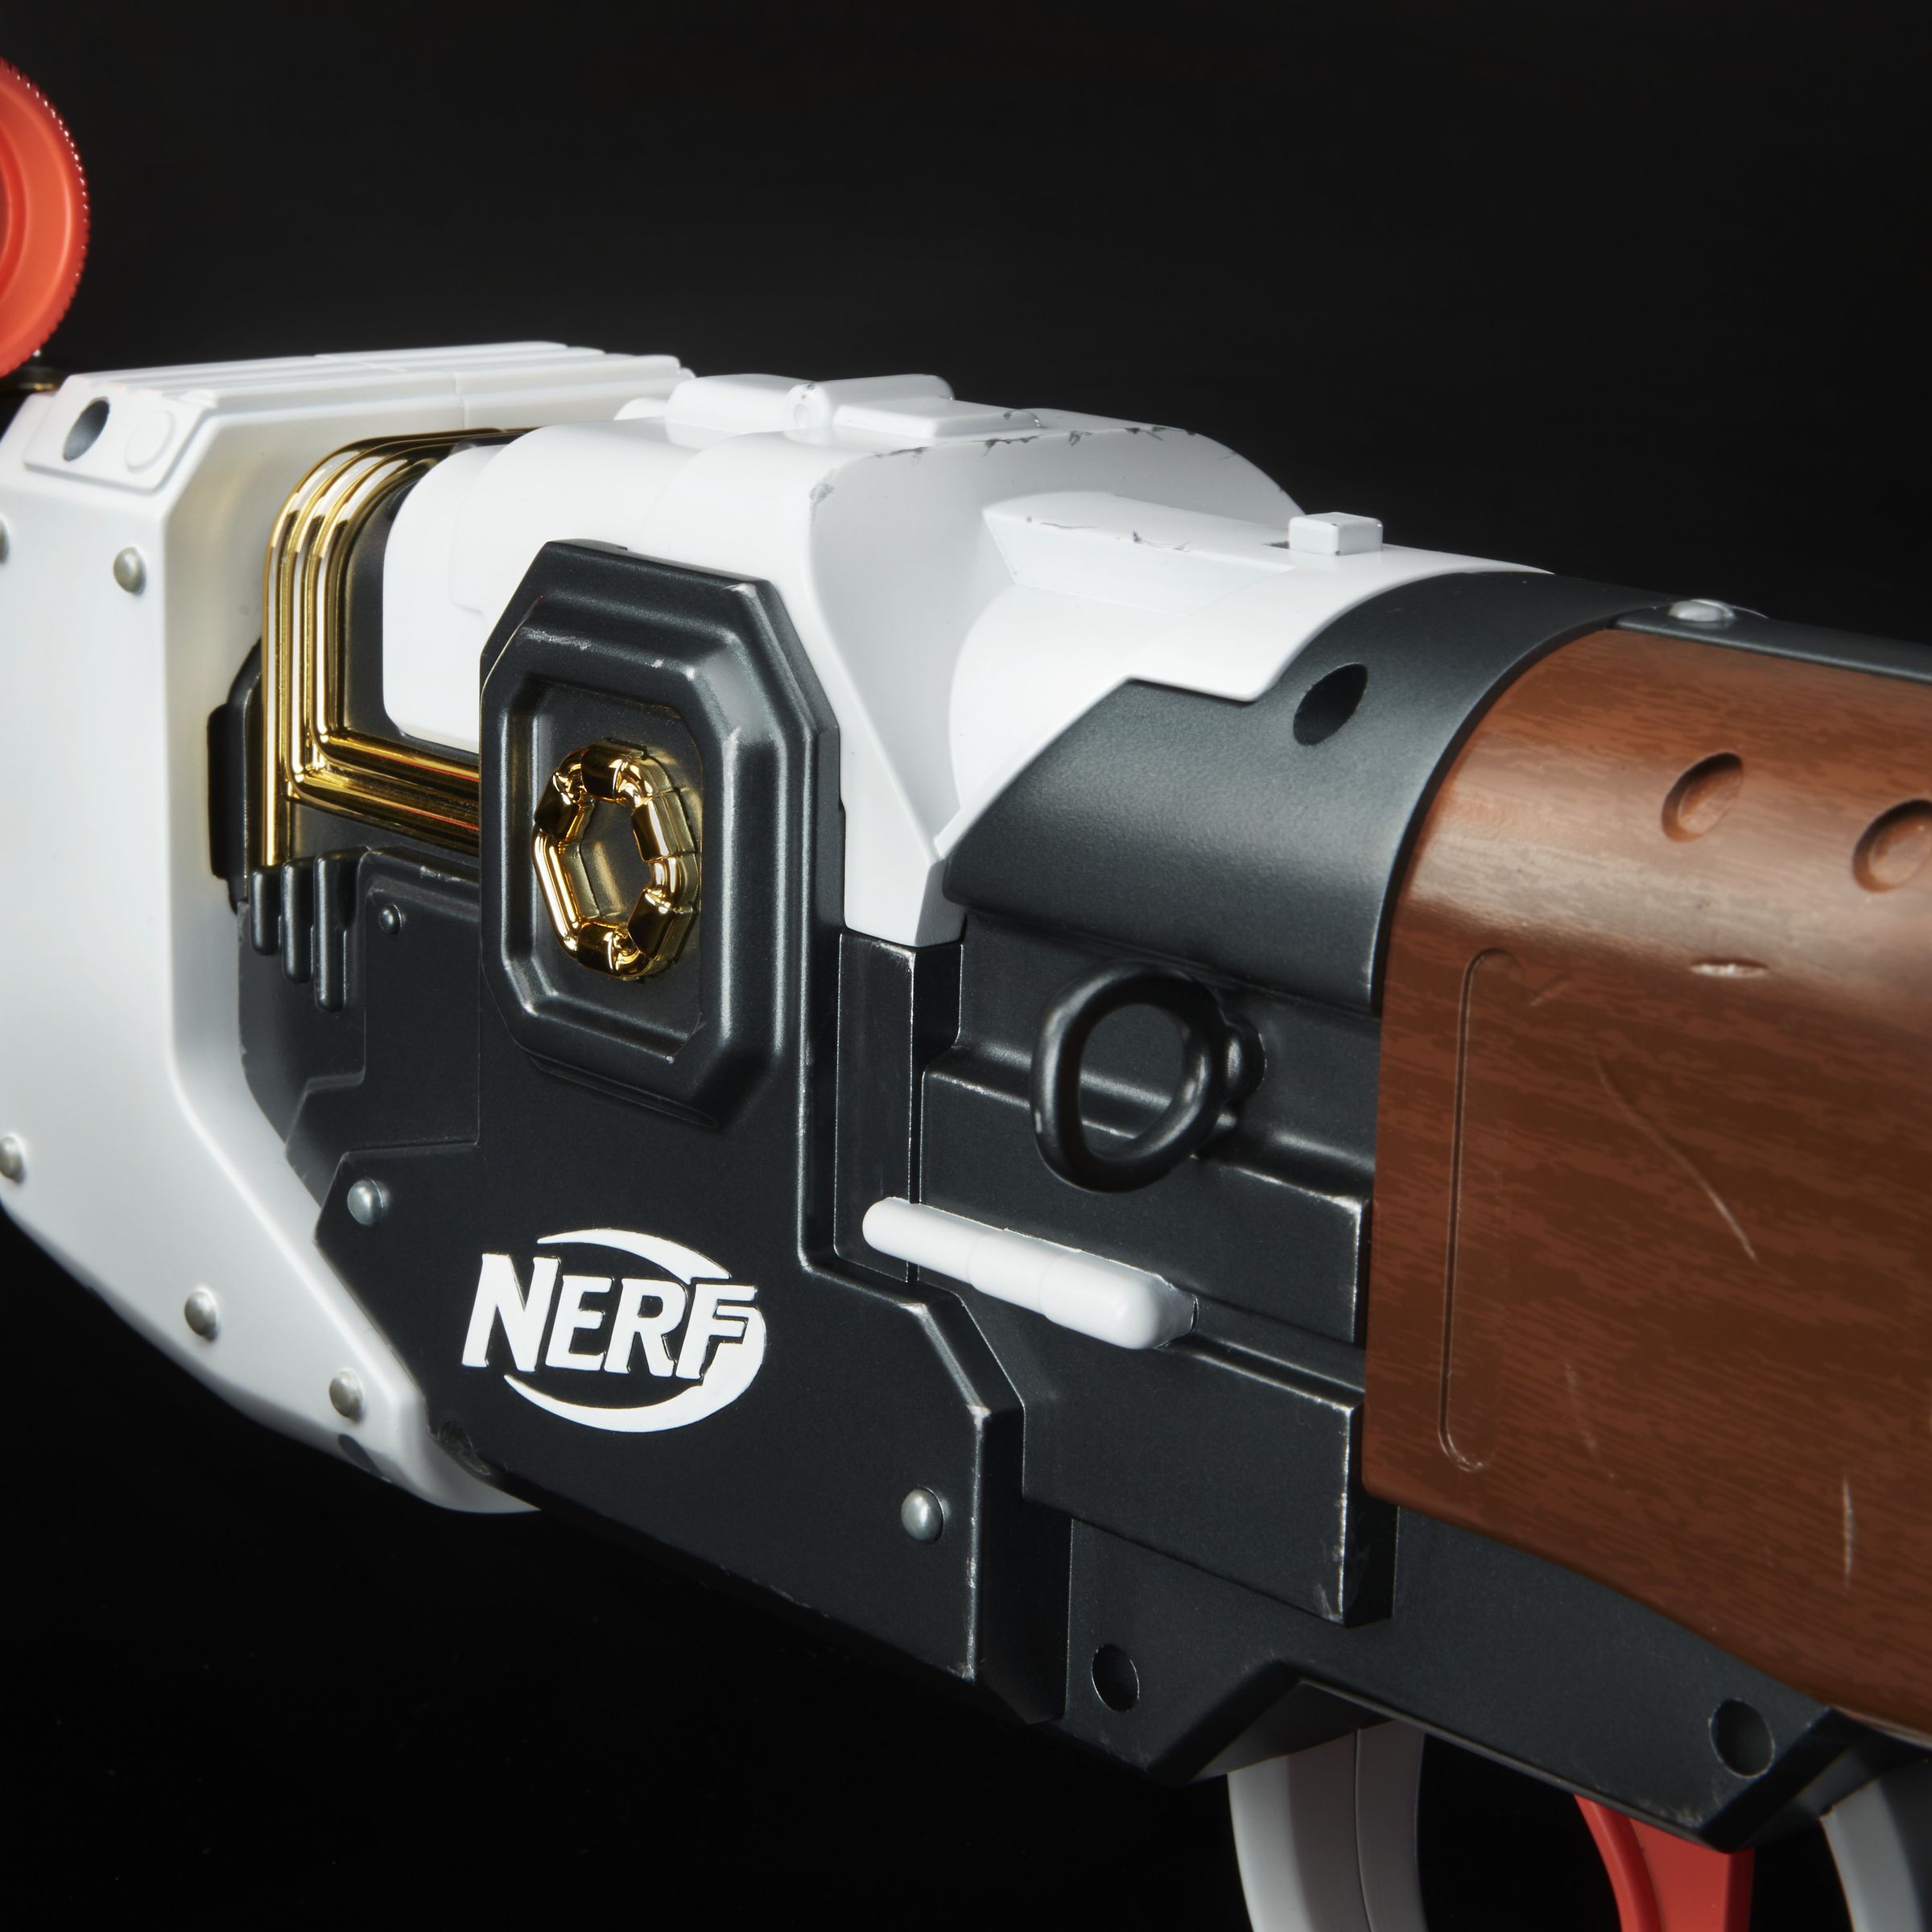 Detailing on both sides (unlike cheaper Nerf blasters), plus attachment points so you can sling it over your back.